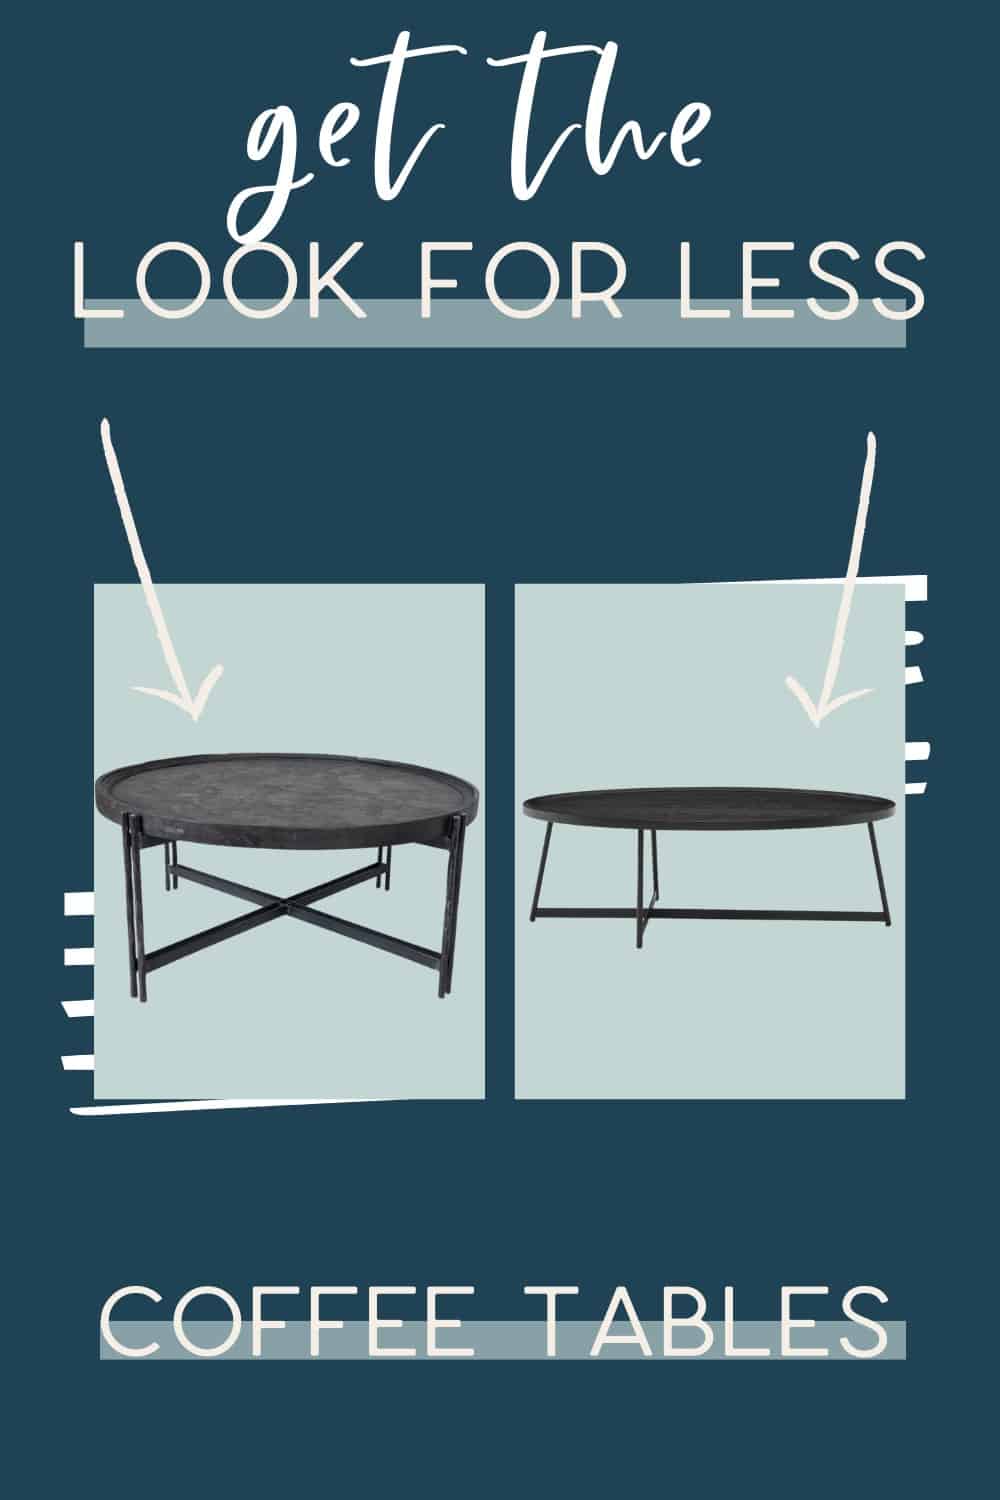 It's time for another edition of get the look for less and today I'm sharing look for less coffee tables! You can have a beautiful stylish home without breaking the bank!  Get the same luxurious and expensive looking living room coffee tables at a budget friendly price.  These coffee tables would be perfect in your living room.  You don’t have to break the bank to have a beautiful home.  If you’re looking for living room ideas, this is for you!  #coffeetables #livingroom #accenttables